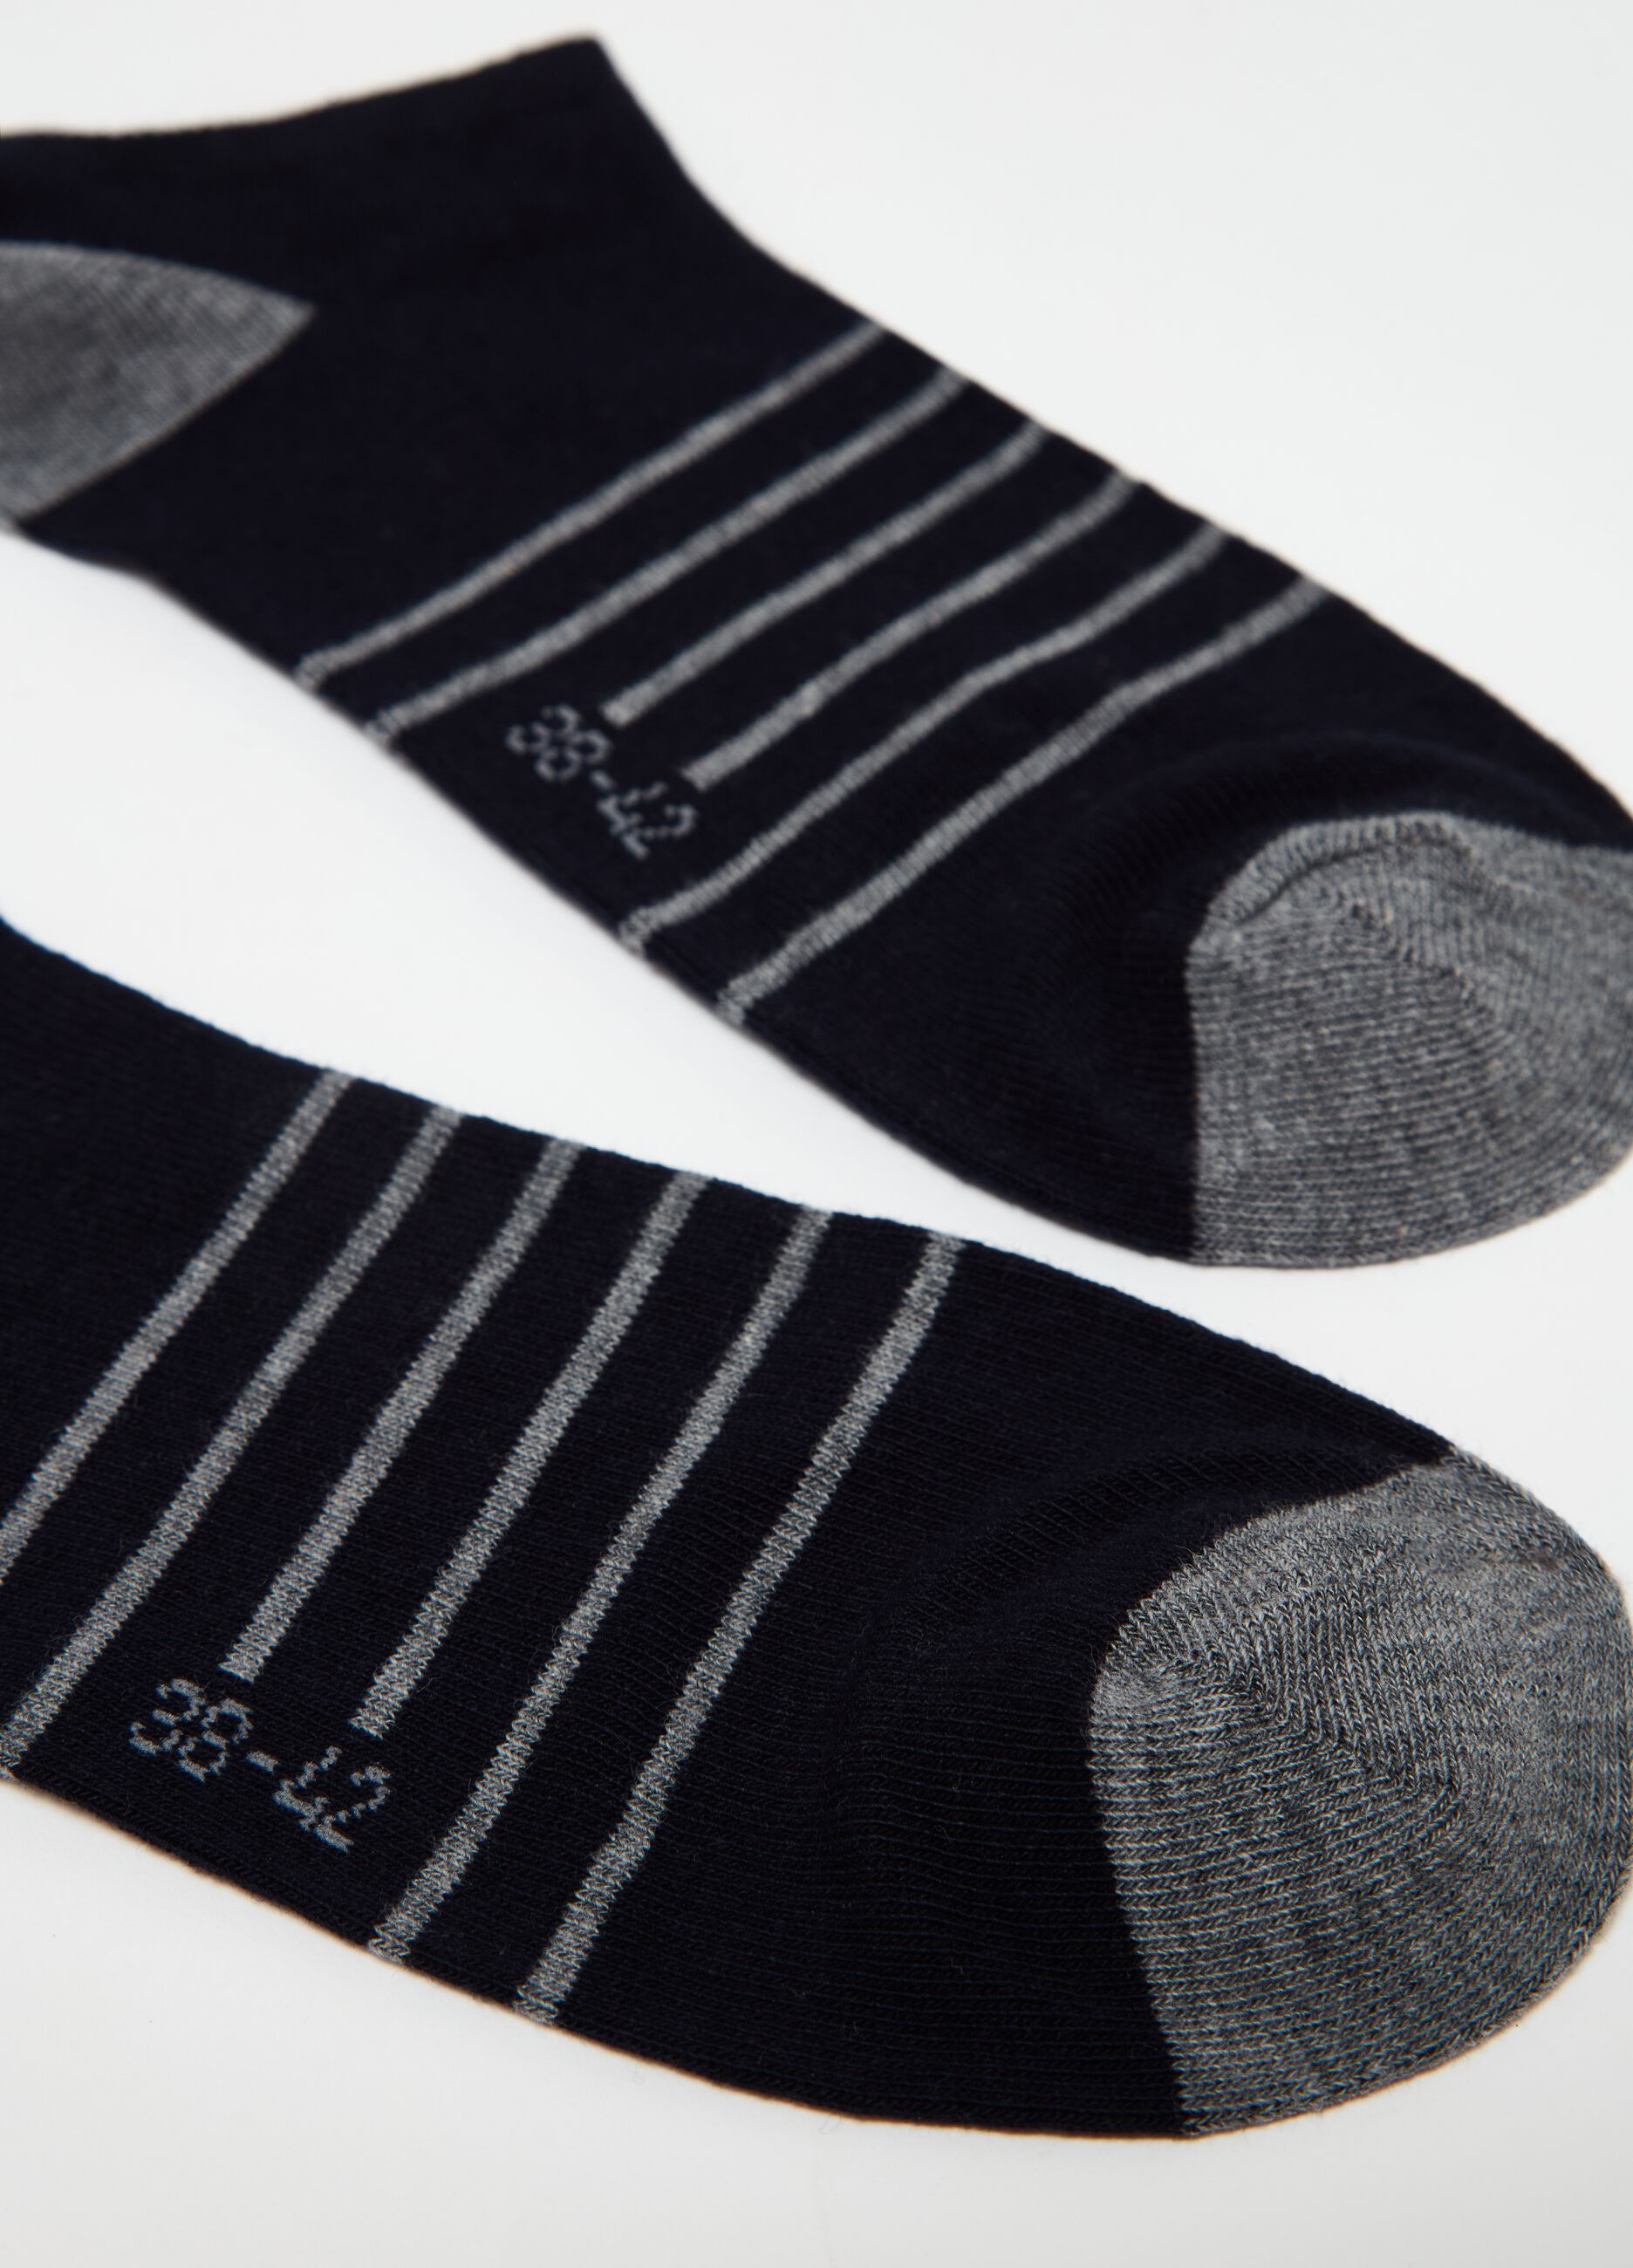 Three-pair pack shoe liners with striped design